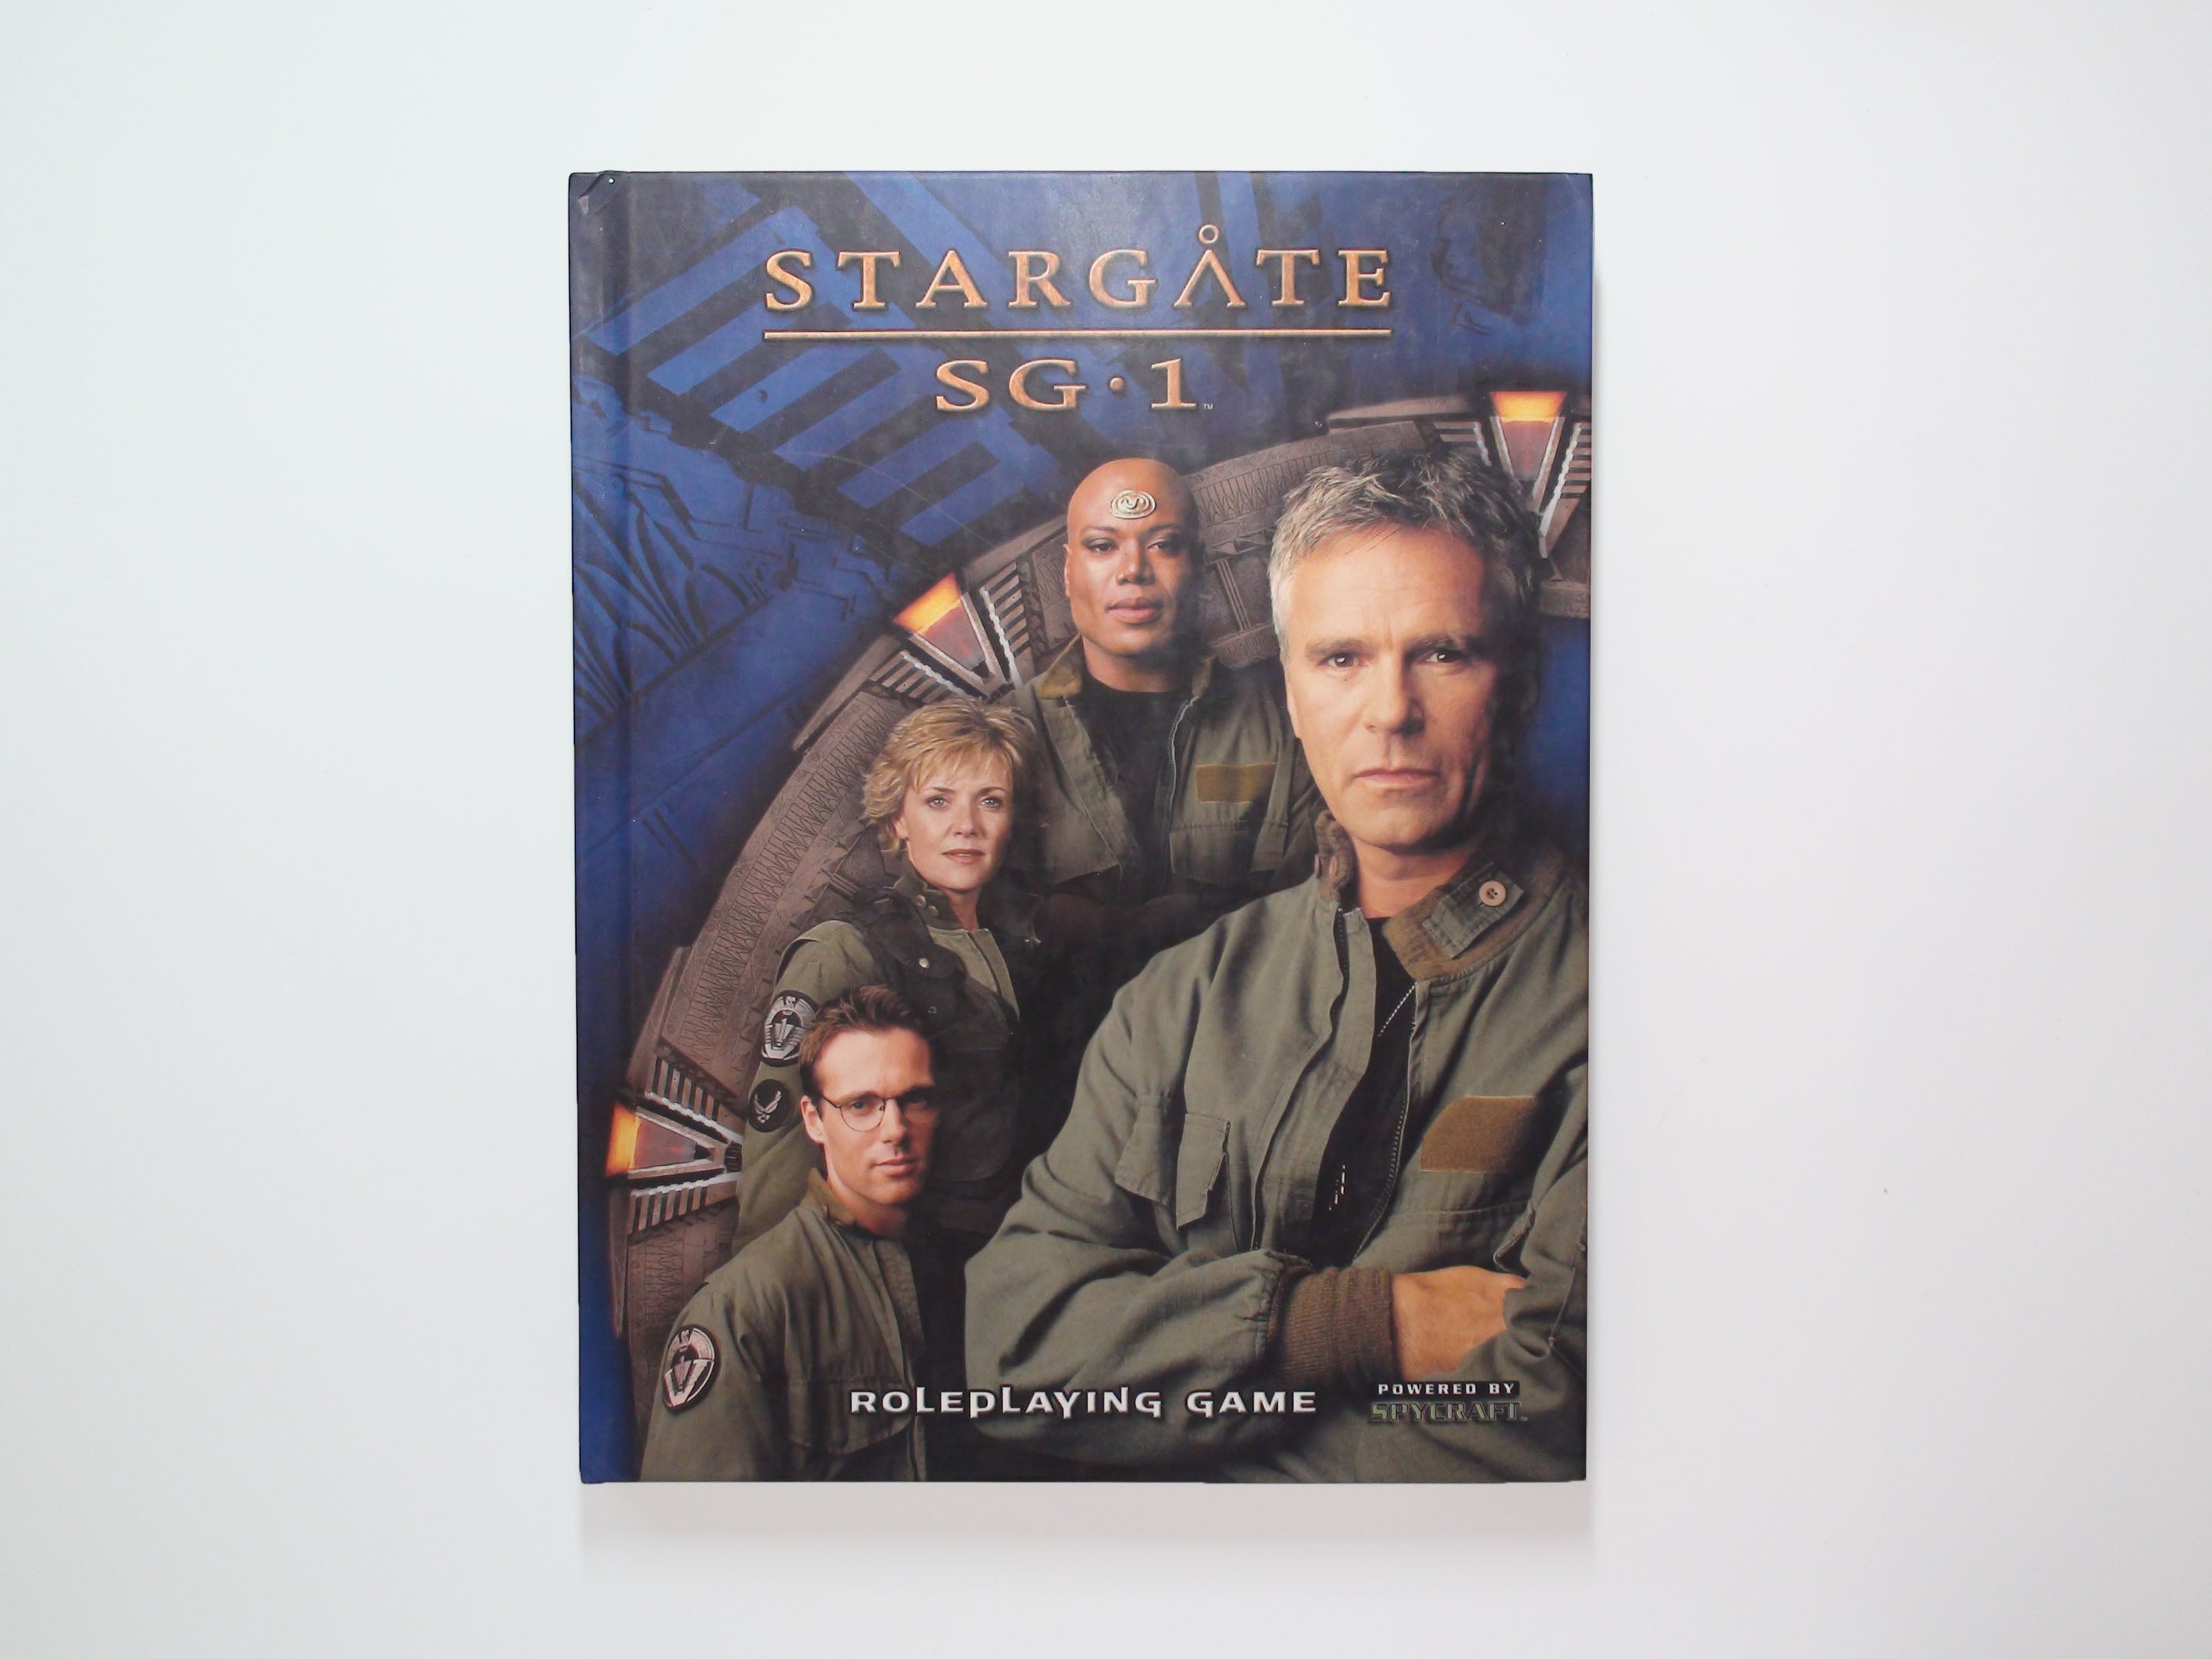 Stargate SG-1 Roleplaying Game Core Rulebook, AEG 2200, D20, 1st Ed, 2003